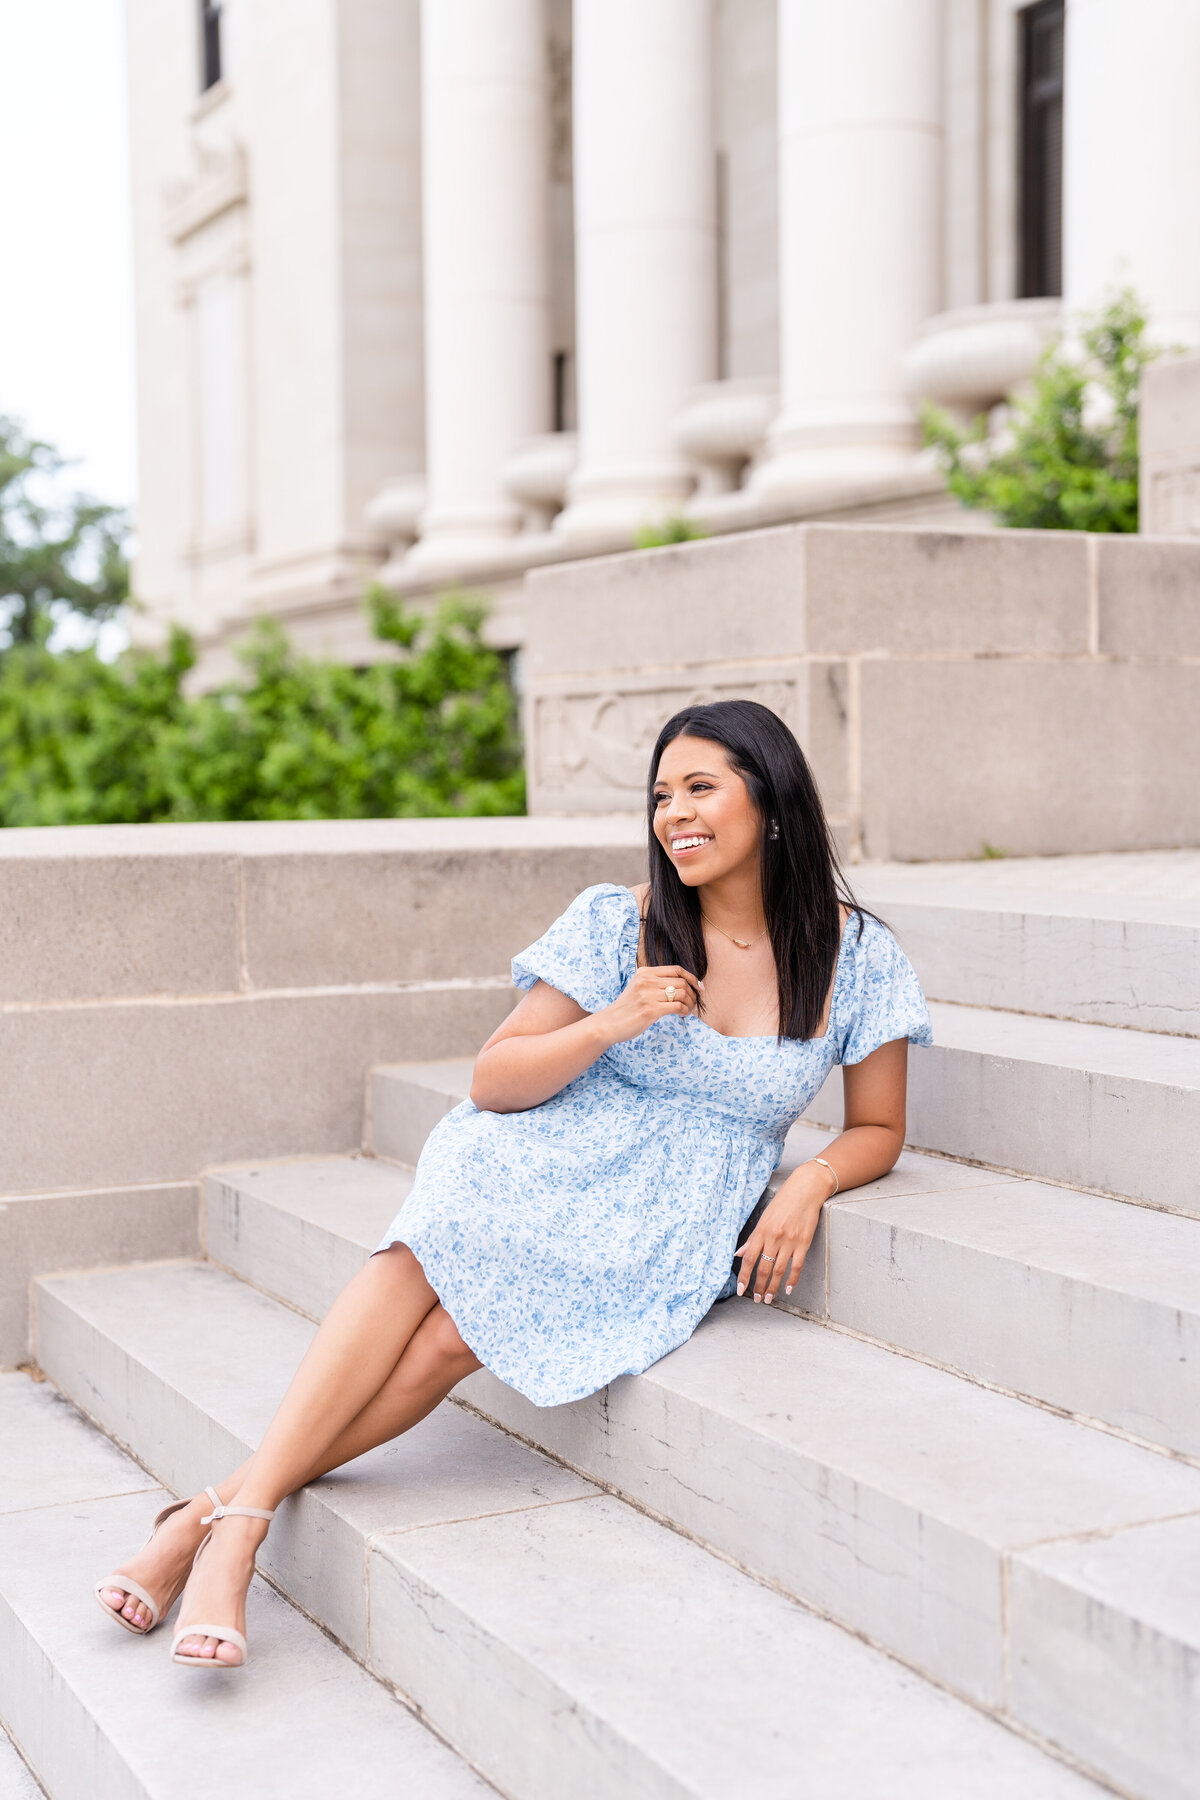 Texas A&M senior girl sitting and leaning back on stairs while touching hair and laughing away while wearing blue dress in front of the Administration Building